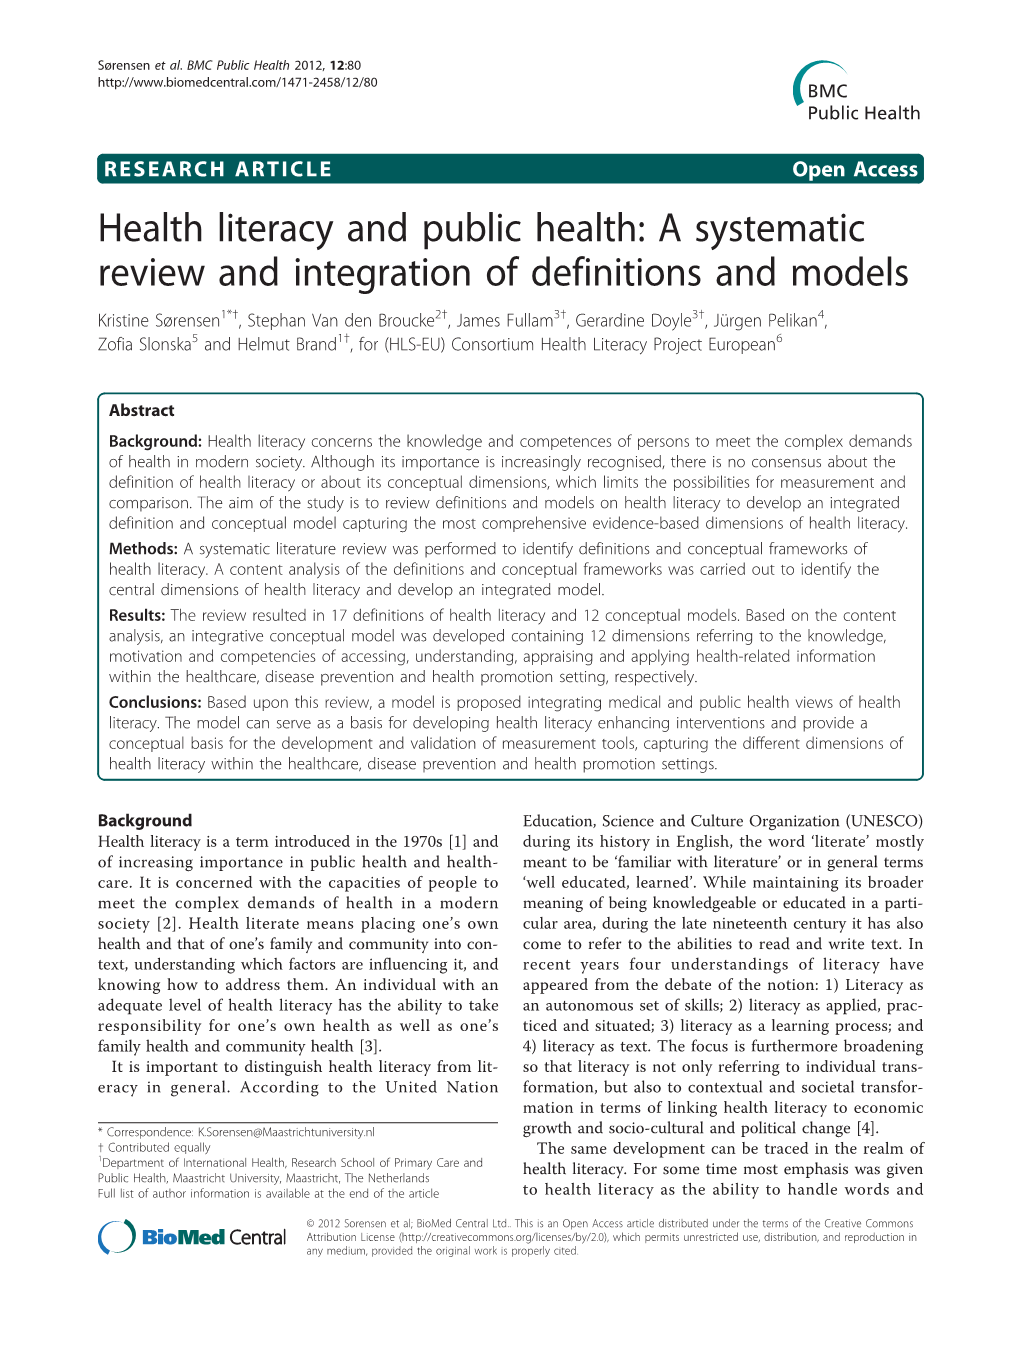 Health Literacy and Public Health: a Systematic Review and Integration of Definitions and Models